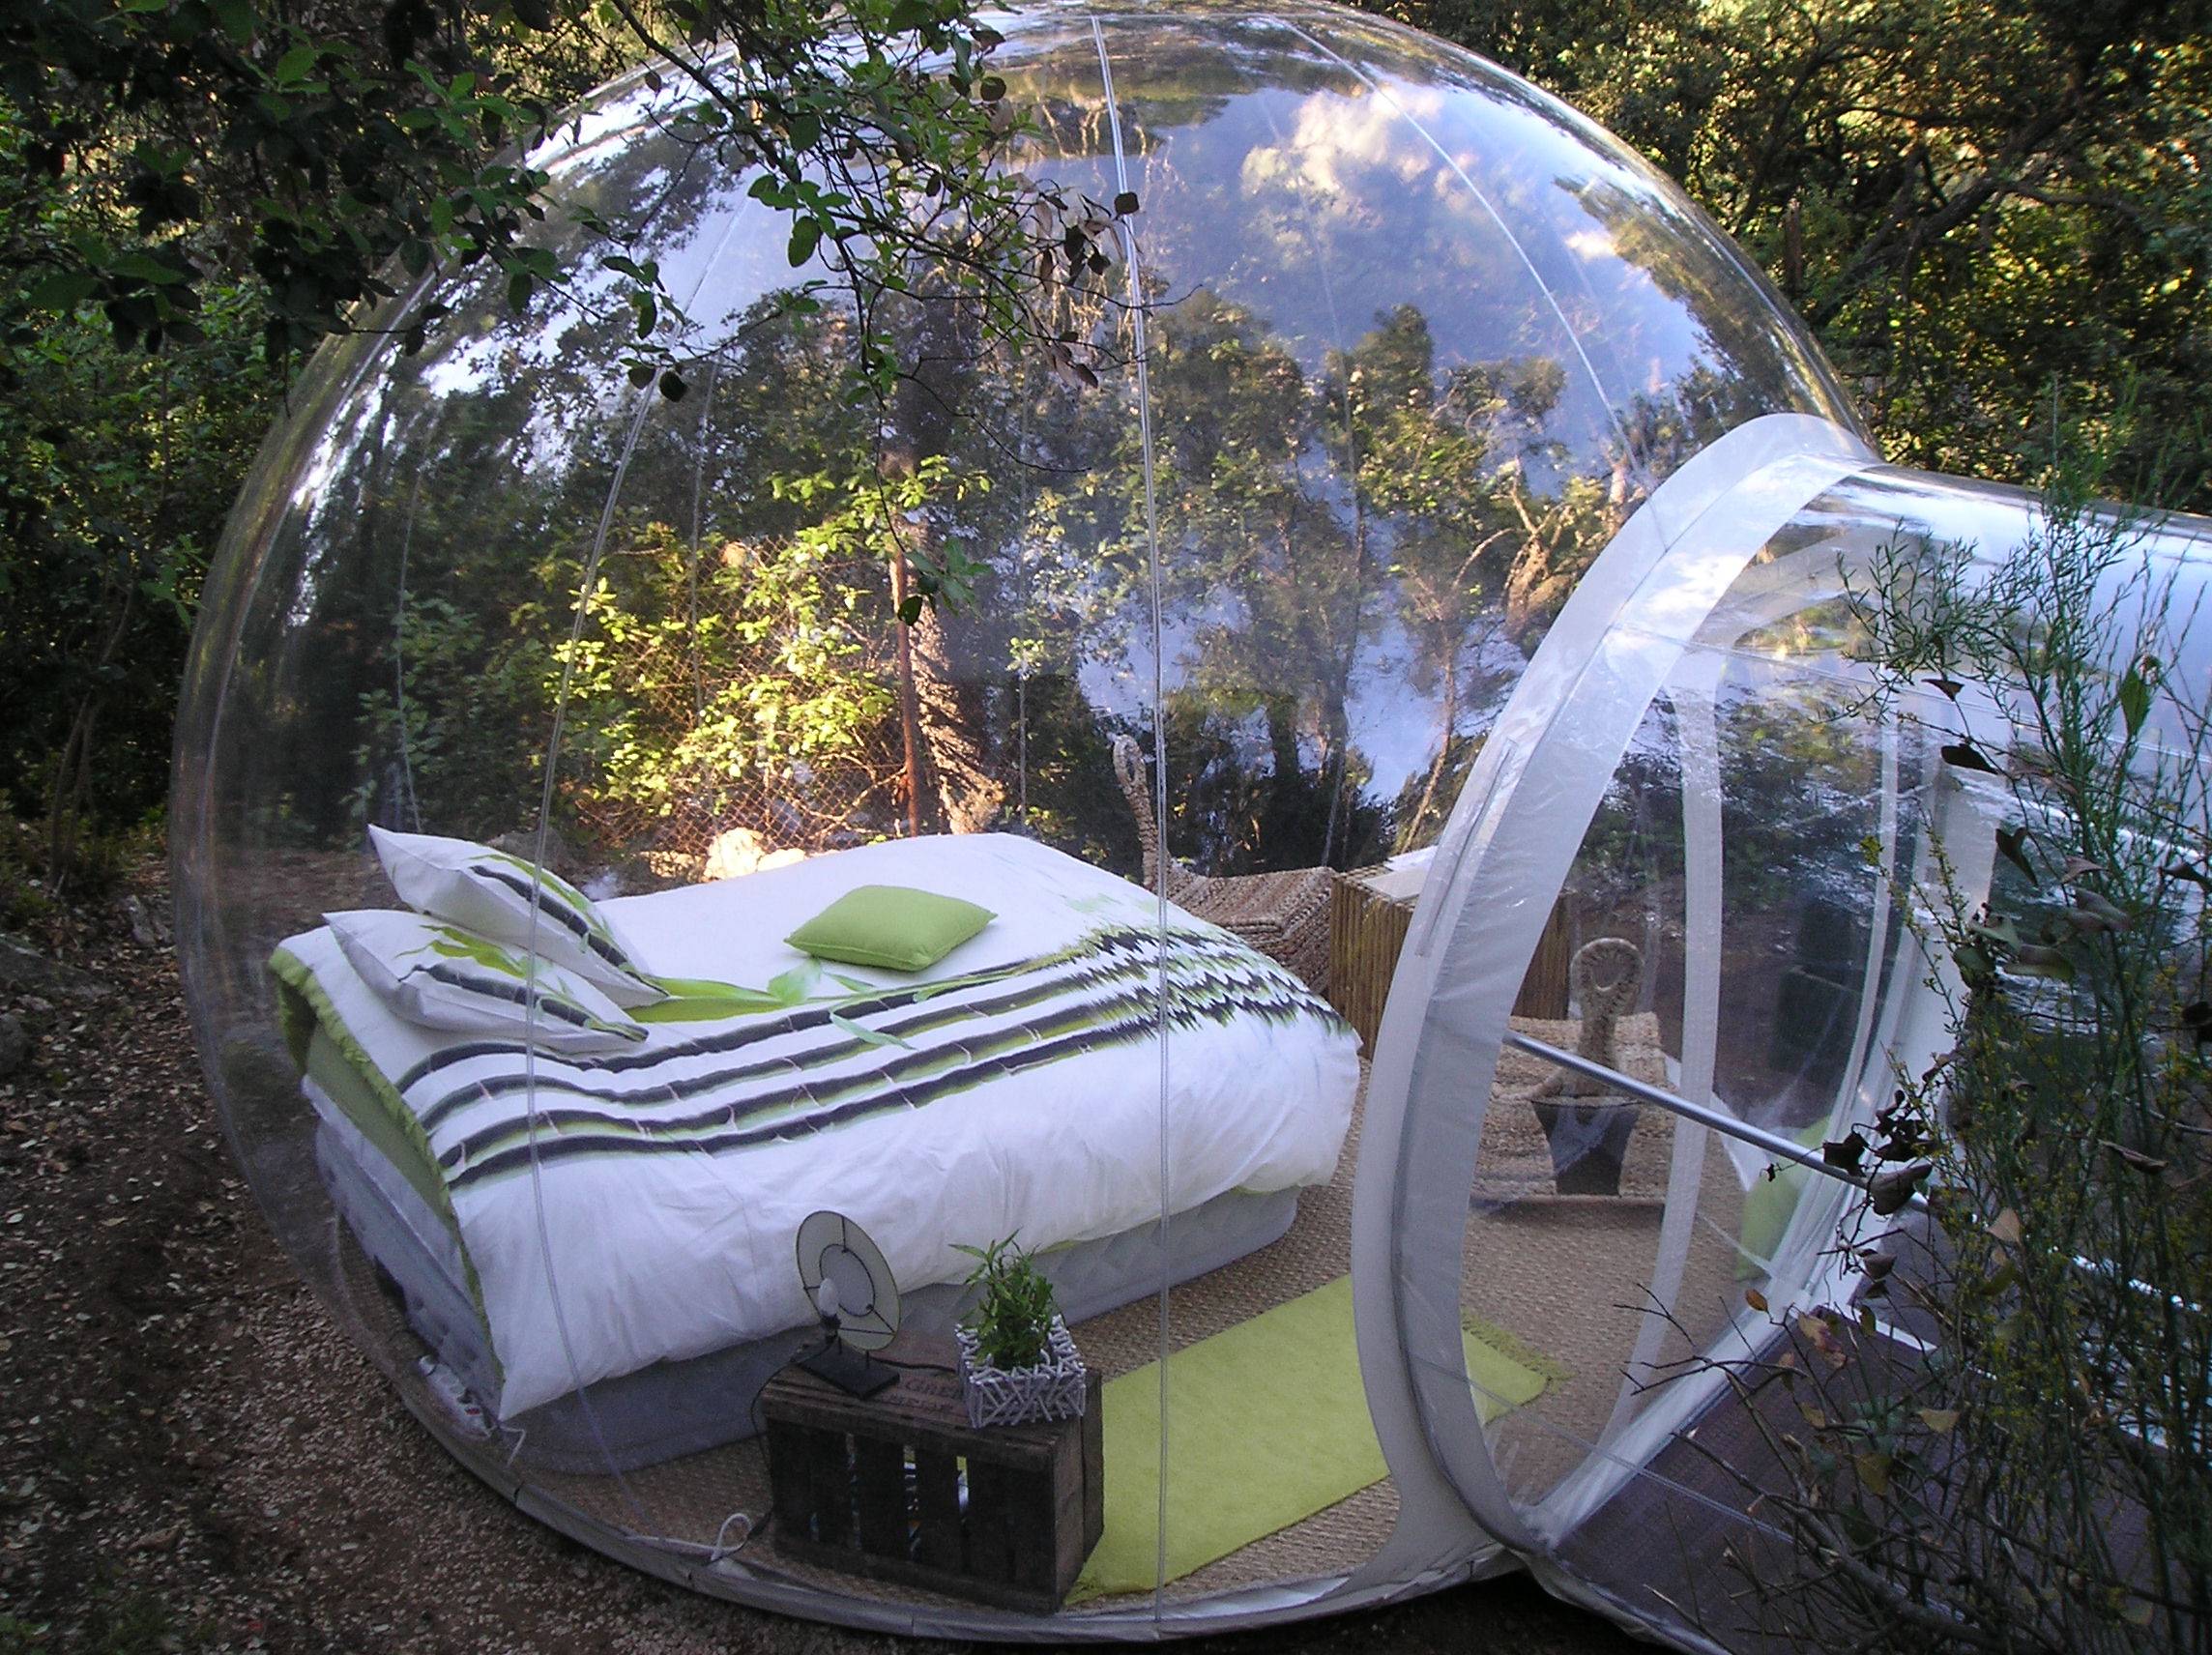 The Bubble bed surrounded by Nature